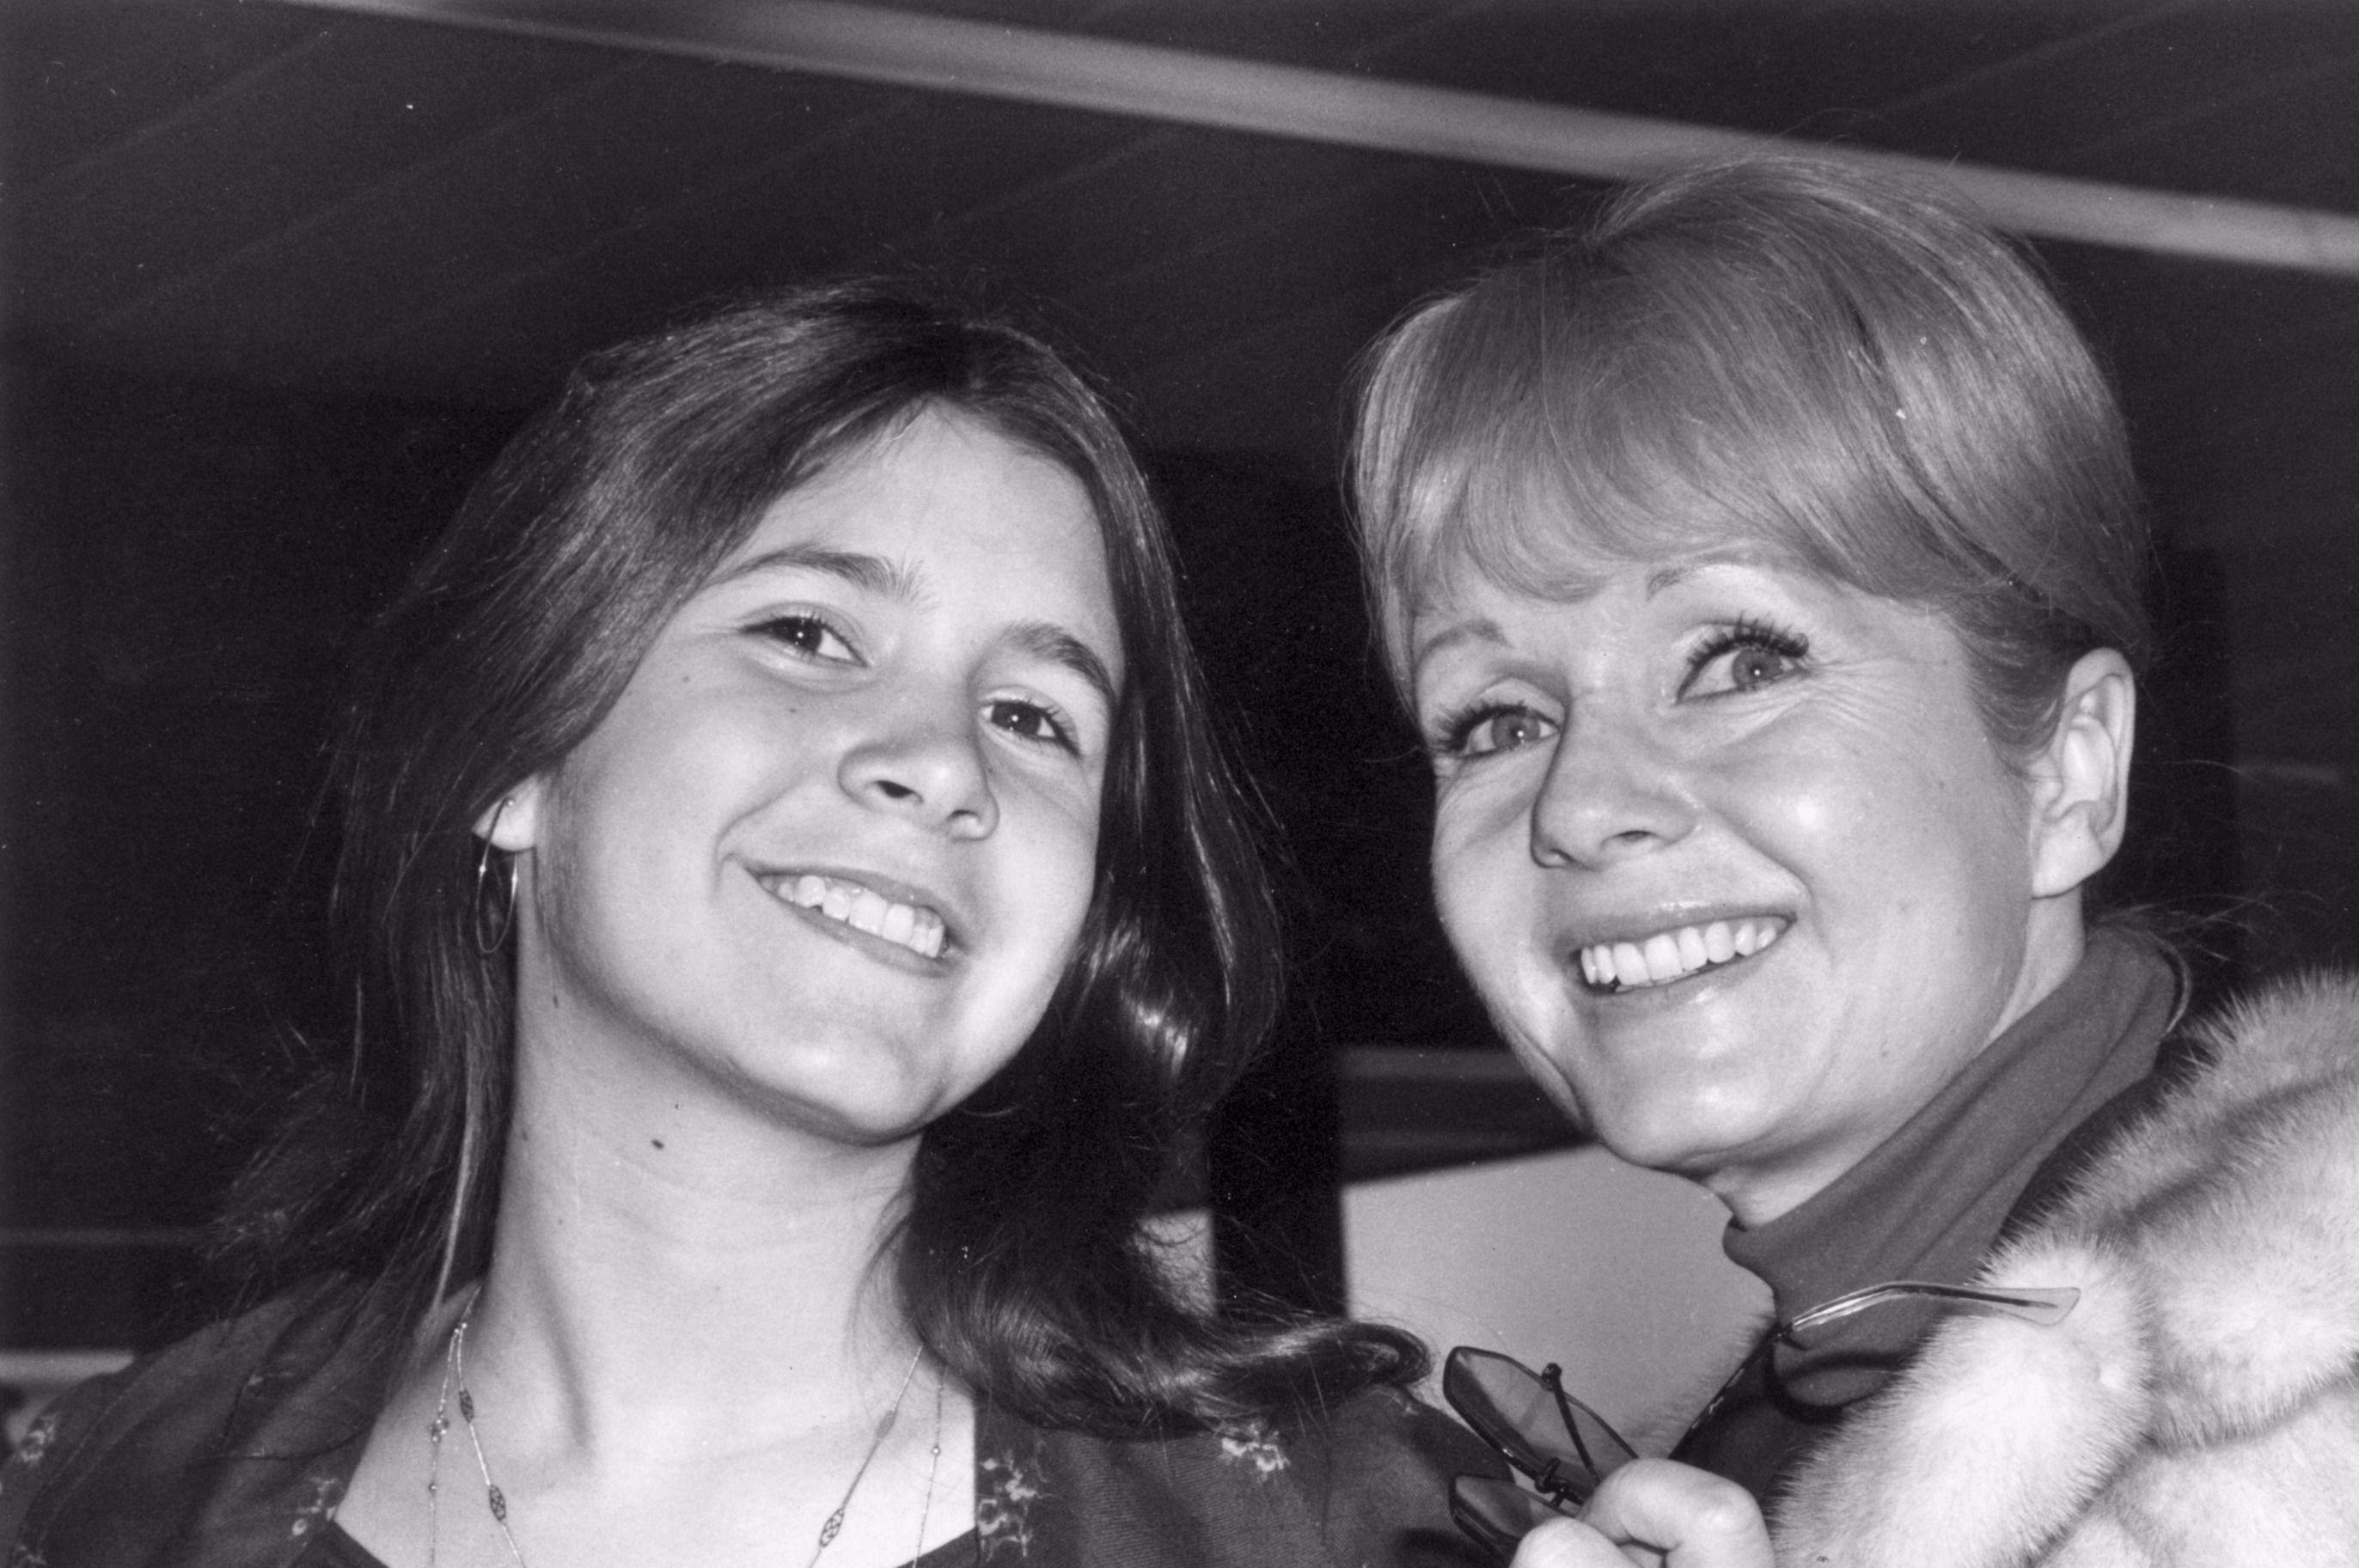 15 Year old Carrie Fisher out with her mother Debbie Reynolds in 1972. Just 5 years later Fisher would land the role of Leia in Star Wars, vaulting her into iconic status.